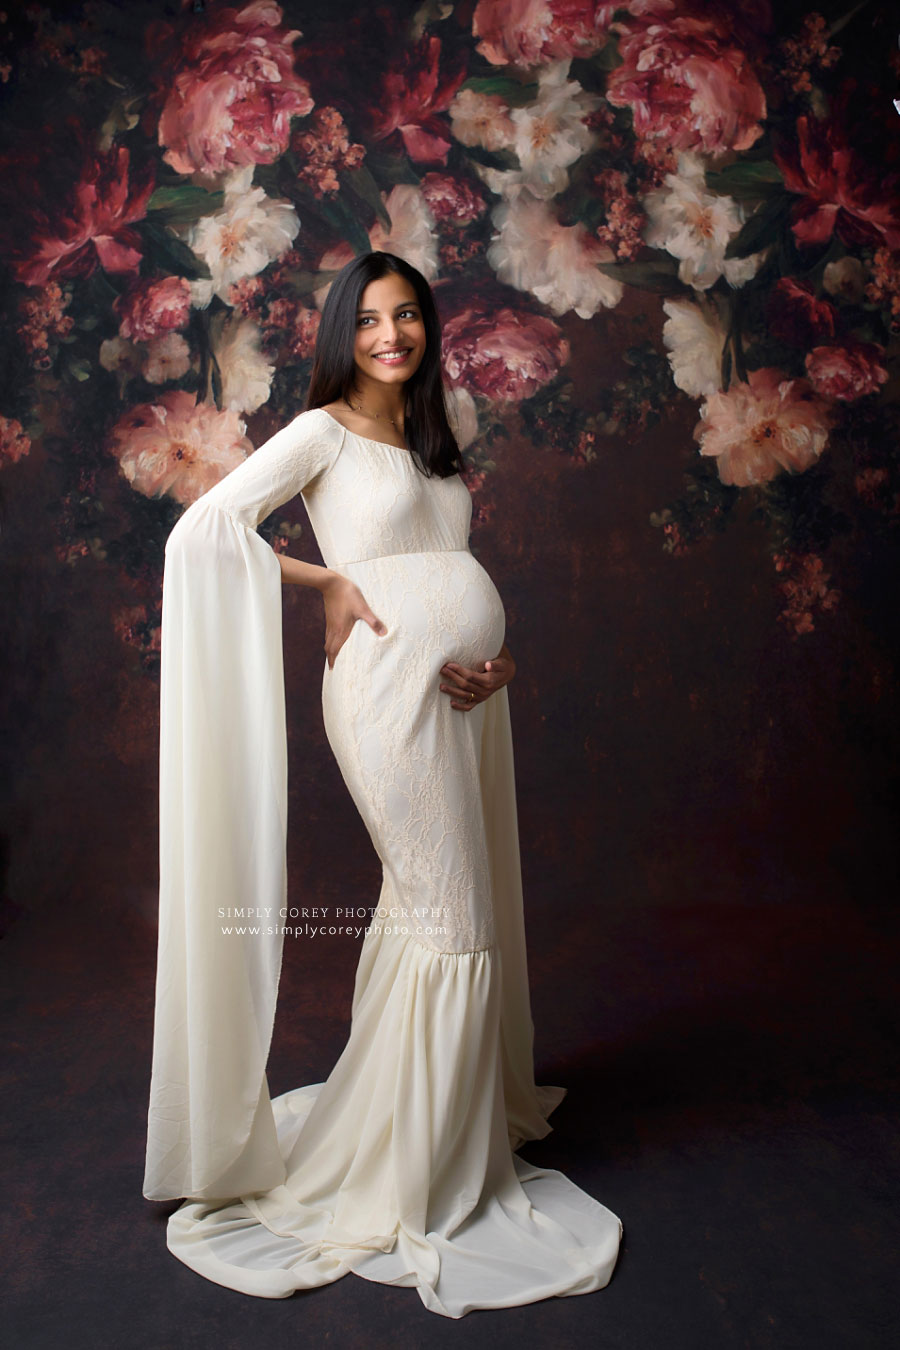 Villa Rica maternity photographer, studio session with white dress and floral backdrop